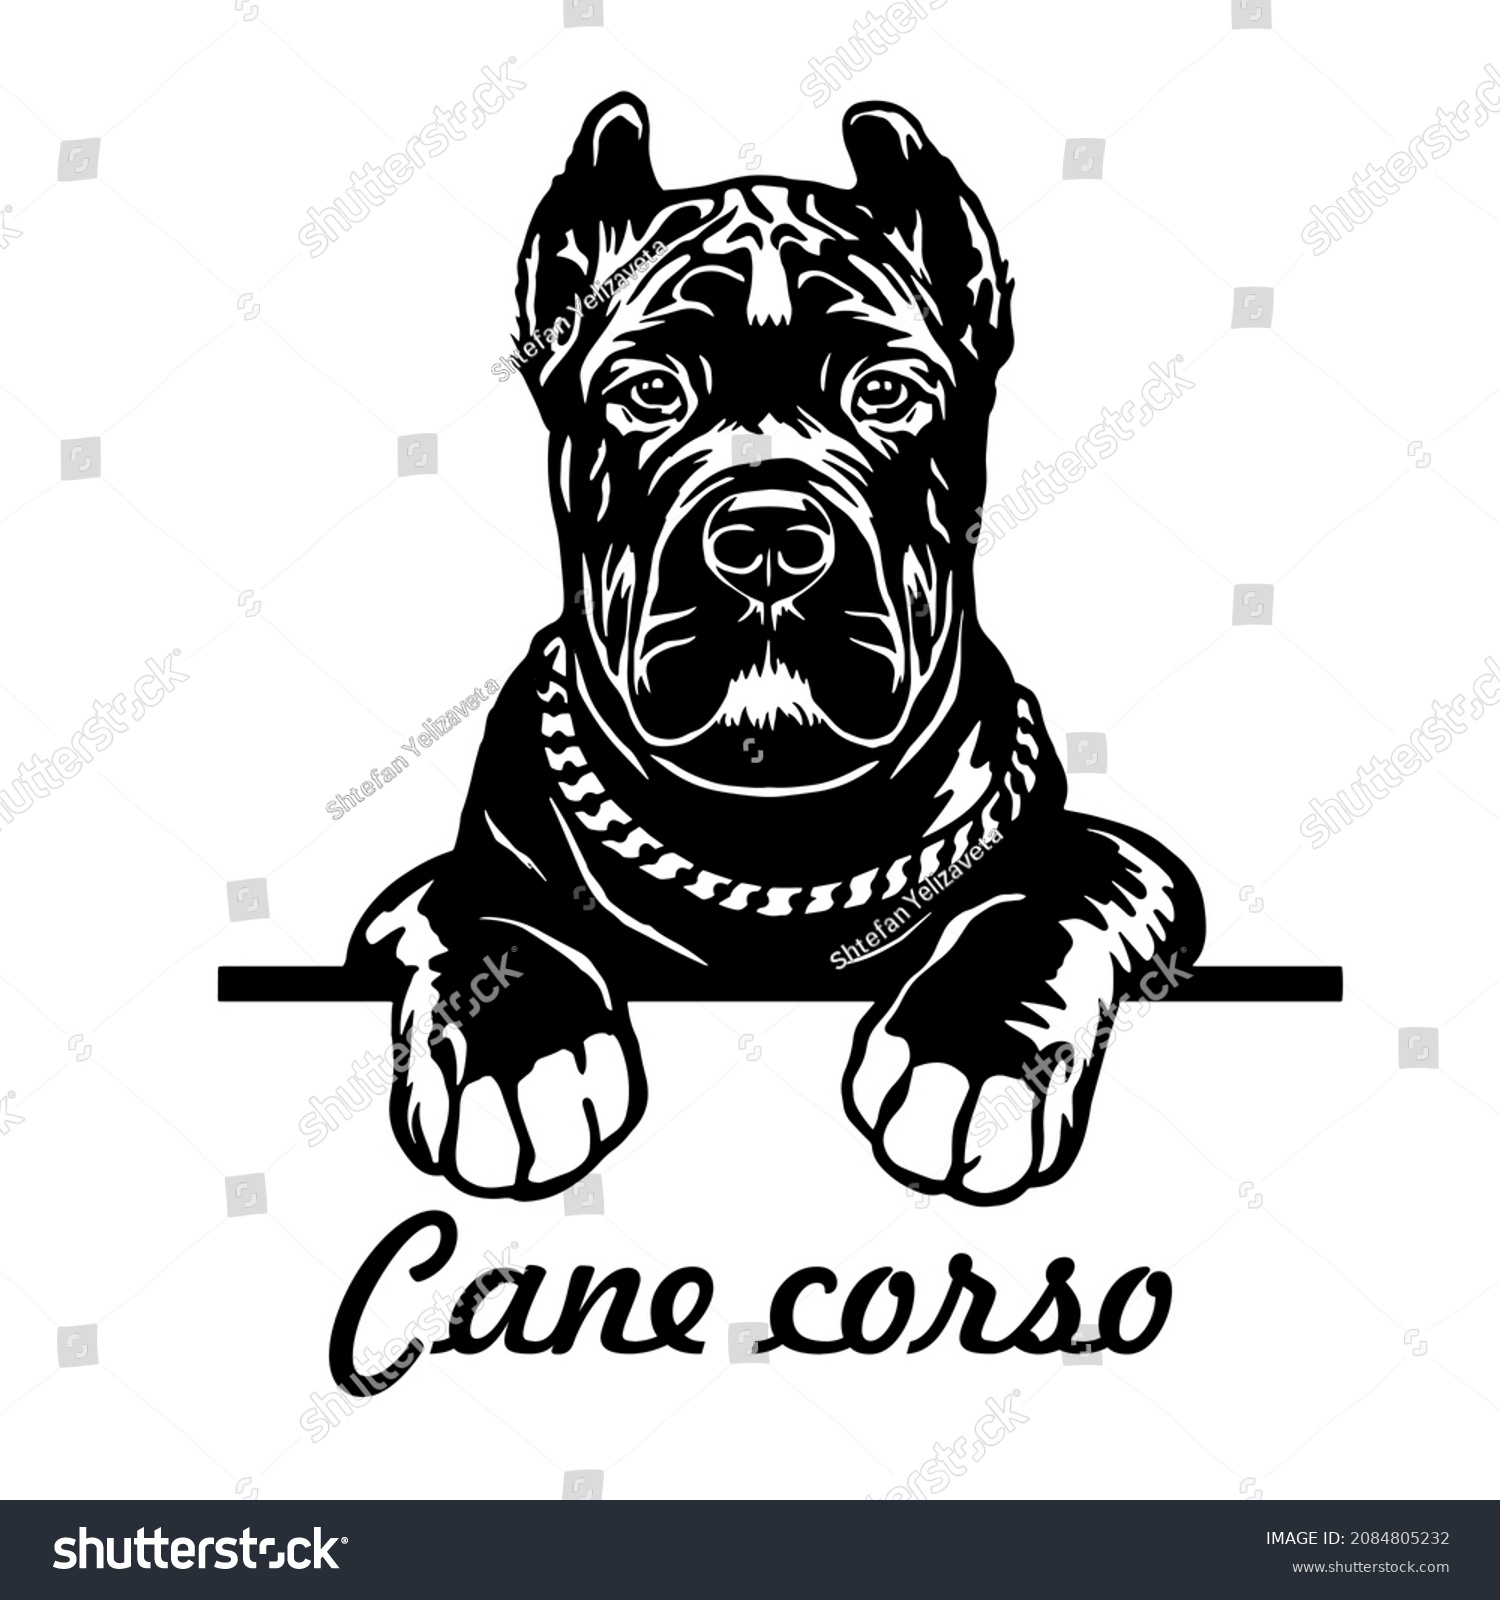 SVG of Cane Corso dog clipart. Young puppy Corso vector illustration file for cutting. Black dog animals svg